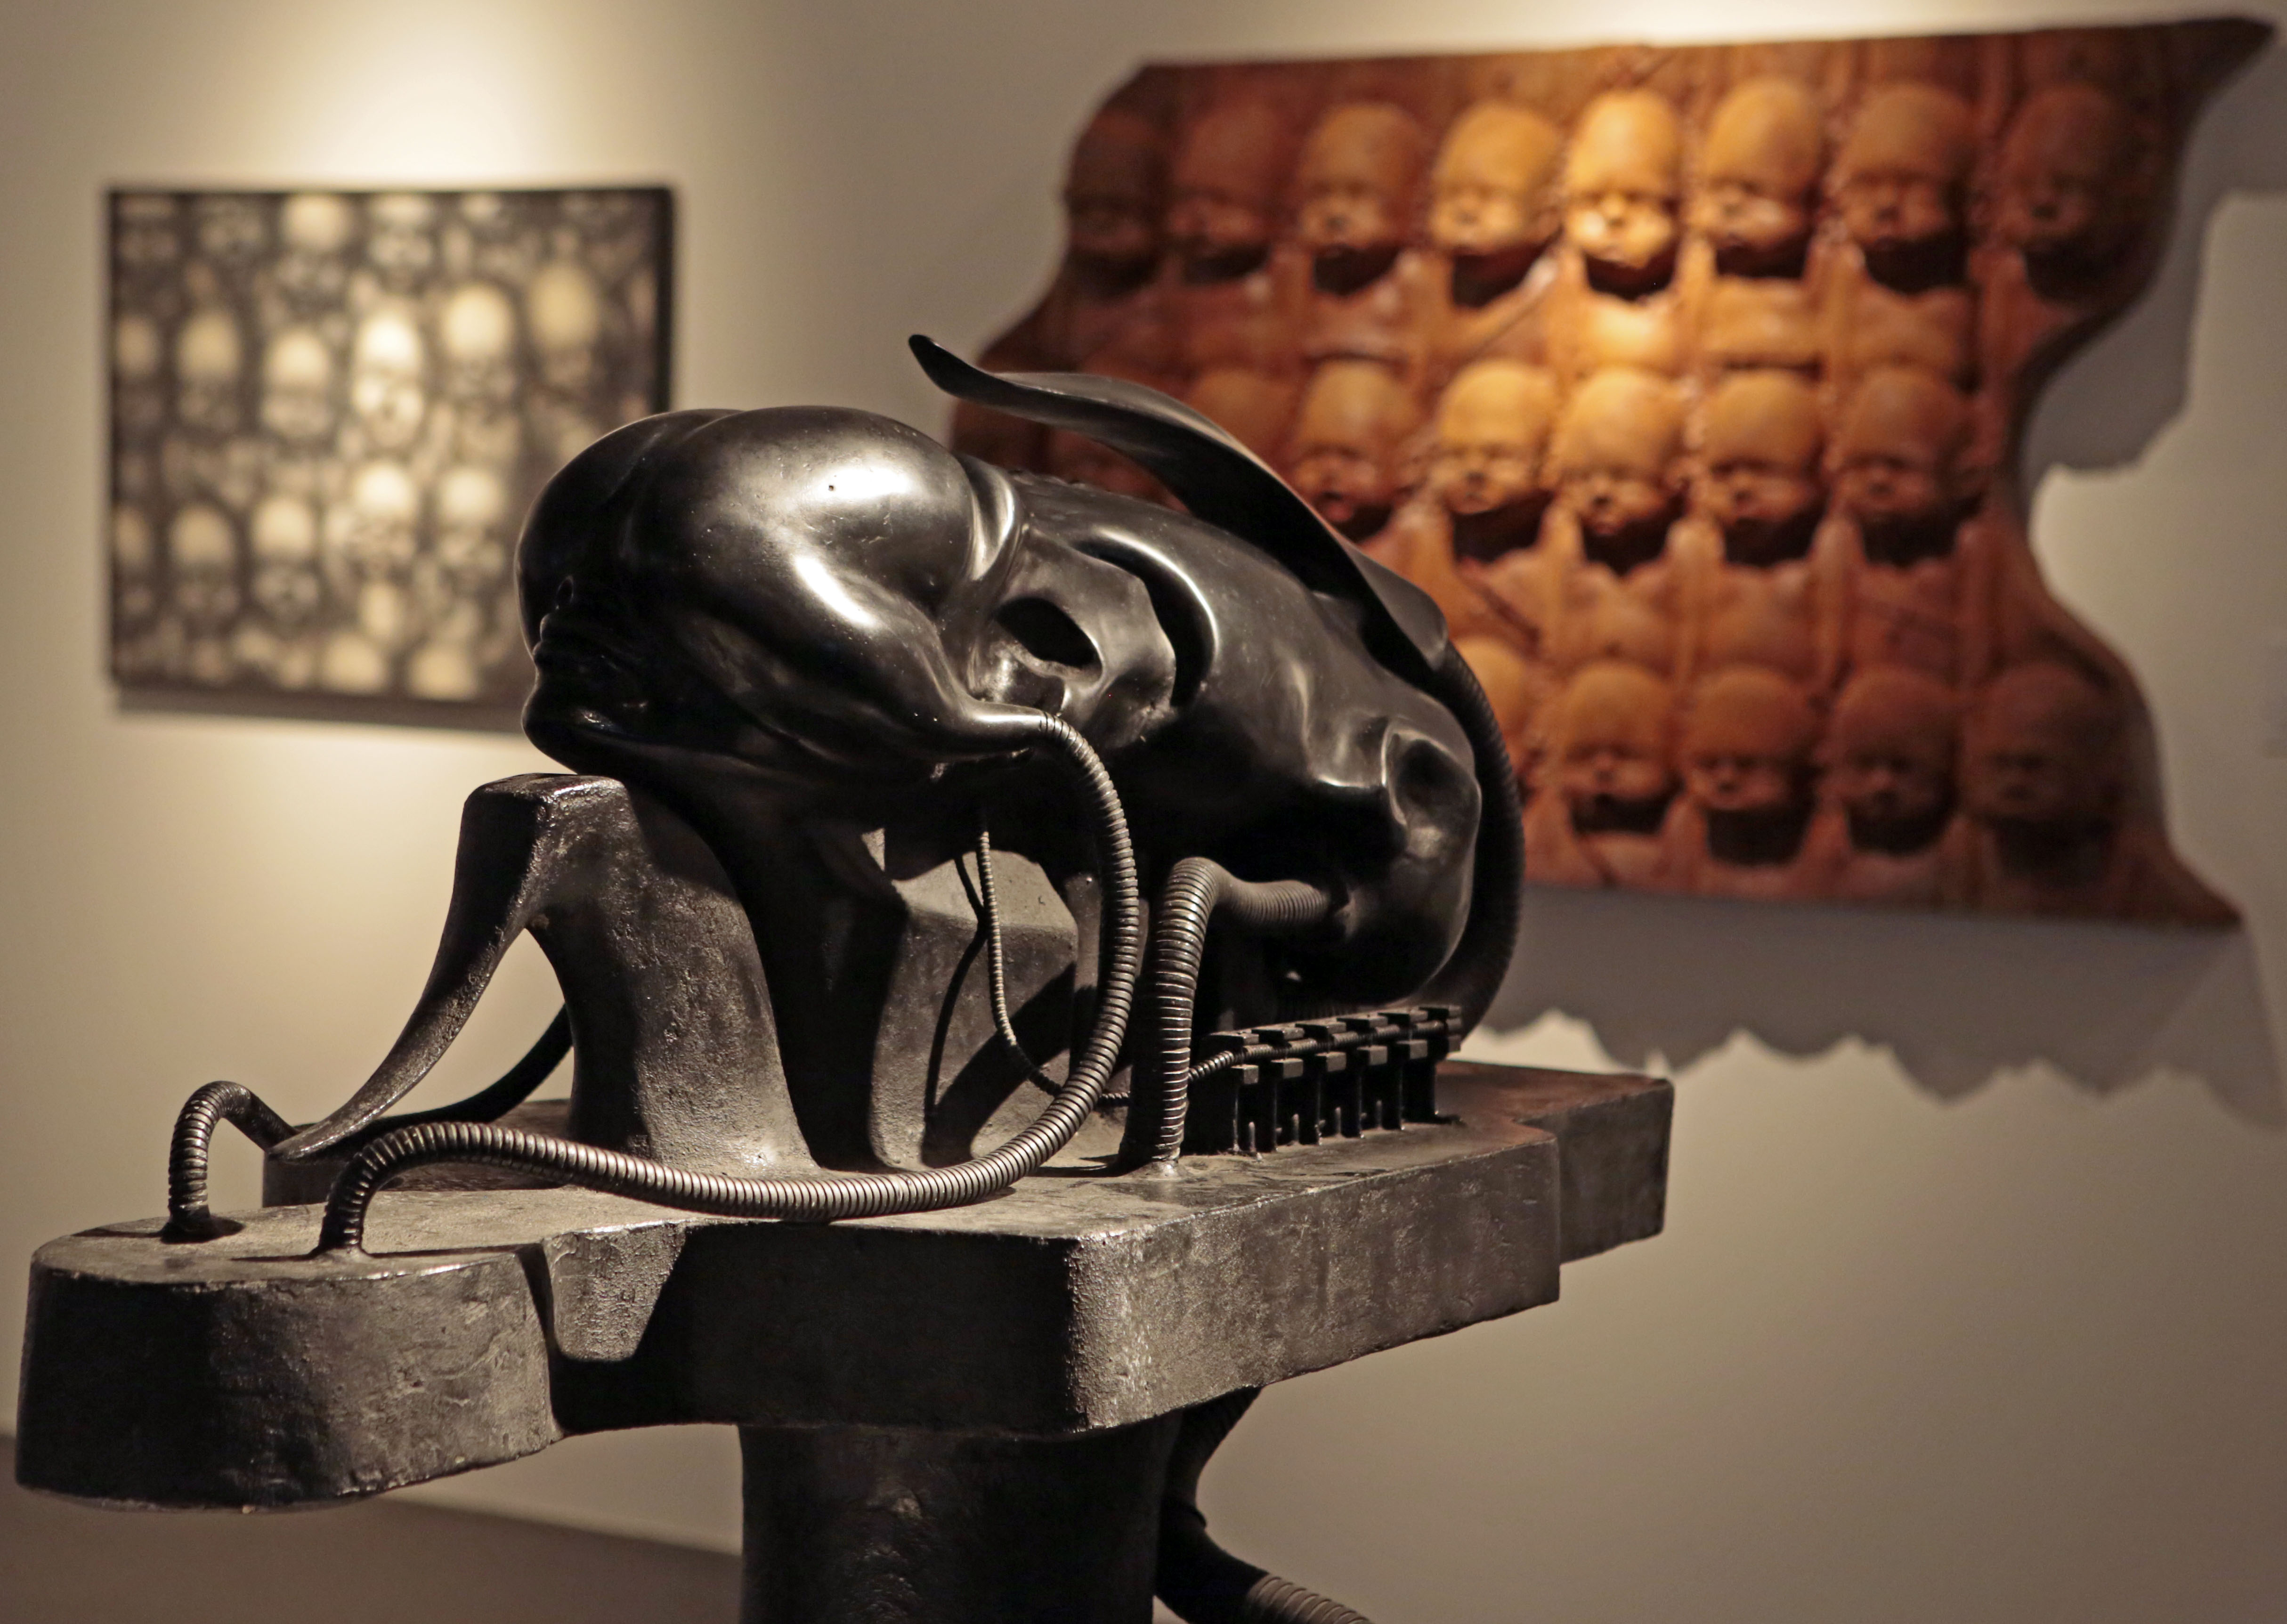 Sculpture by H.R. Giger during the opening of the Ars Electronica 2013 exhibition 'HR Giger.